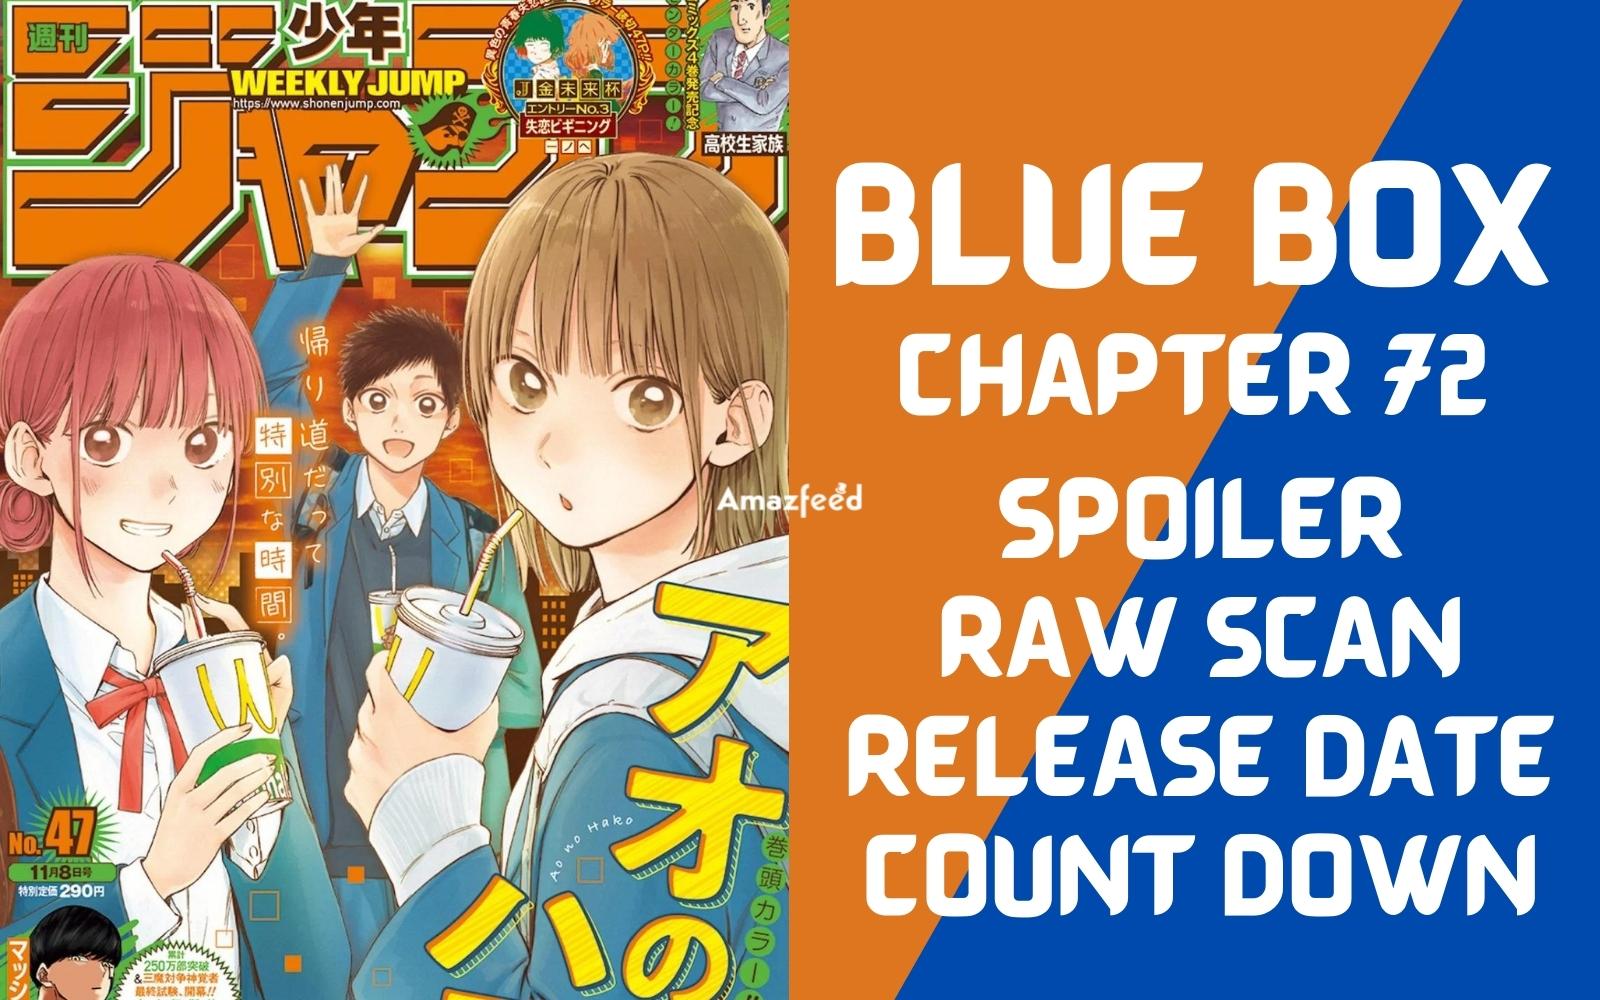 Blue Box Chapter 72 Spoiler, Raw Scan, Countdown, Release Date